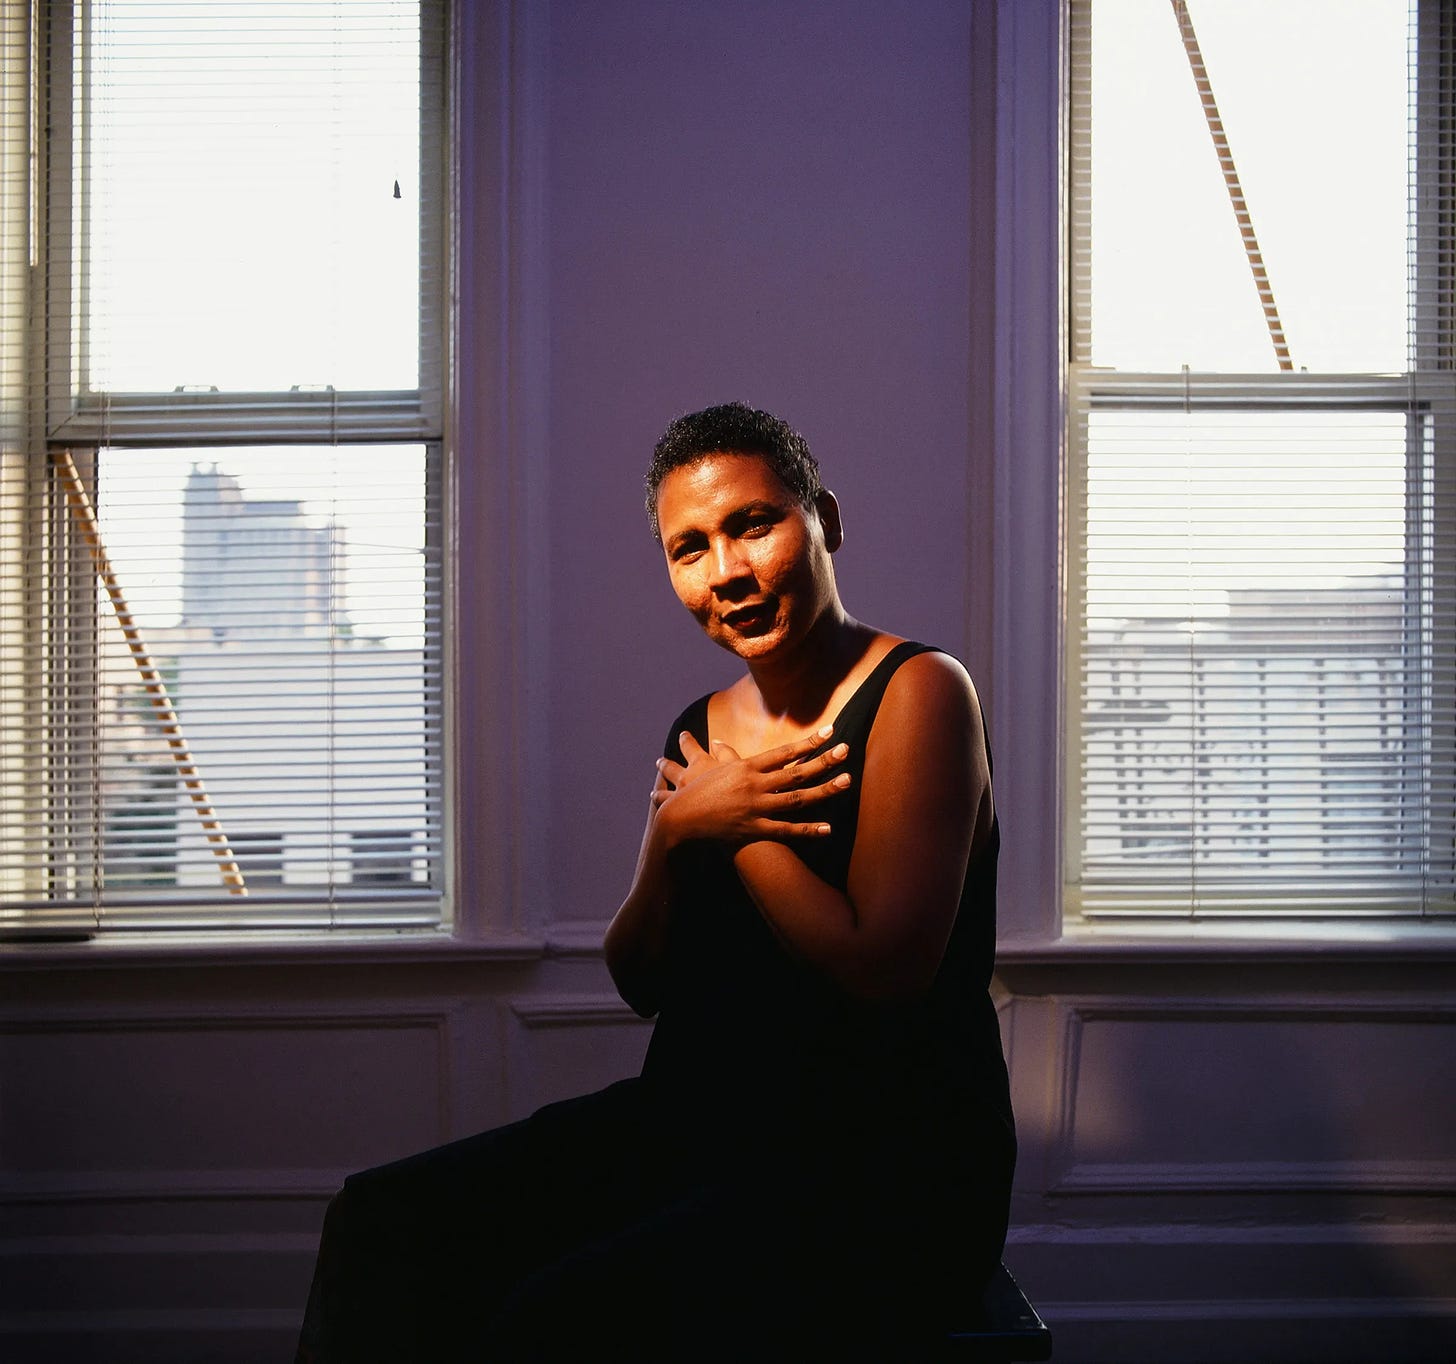 bell hooks is lit by an overhead light as she crosses her hands at her chest and the blue-ish purple light and New York City skyline becomes the background.